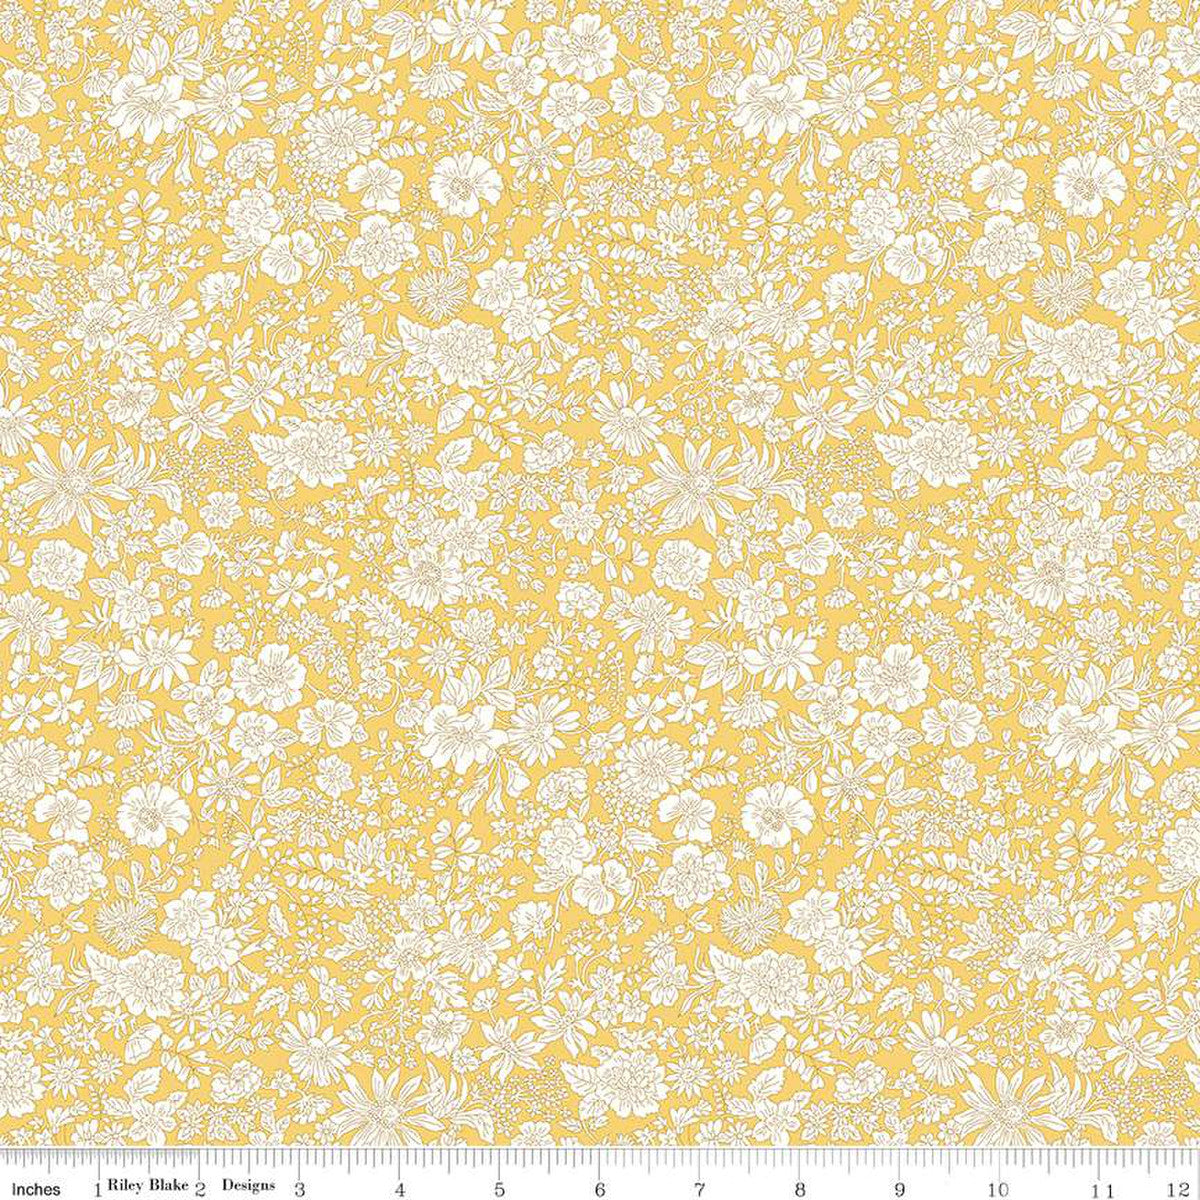 Sunshine Yellow - Emily Belle - Liberty of London quilting cotton